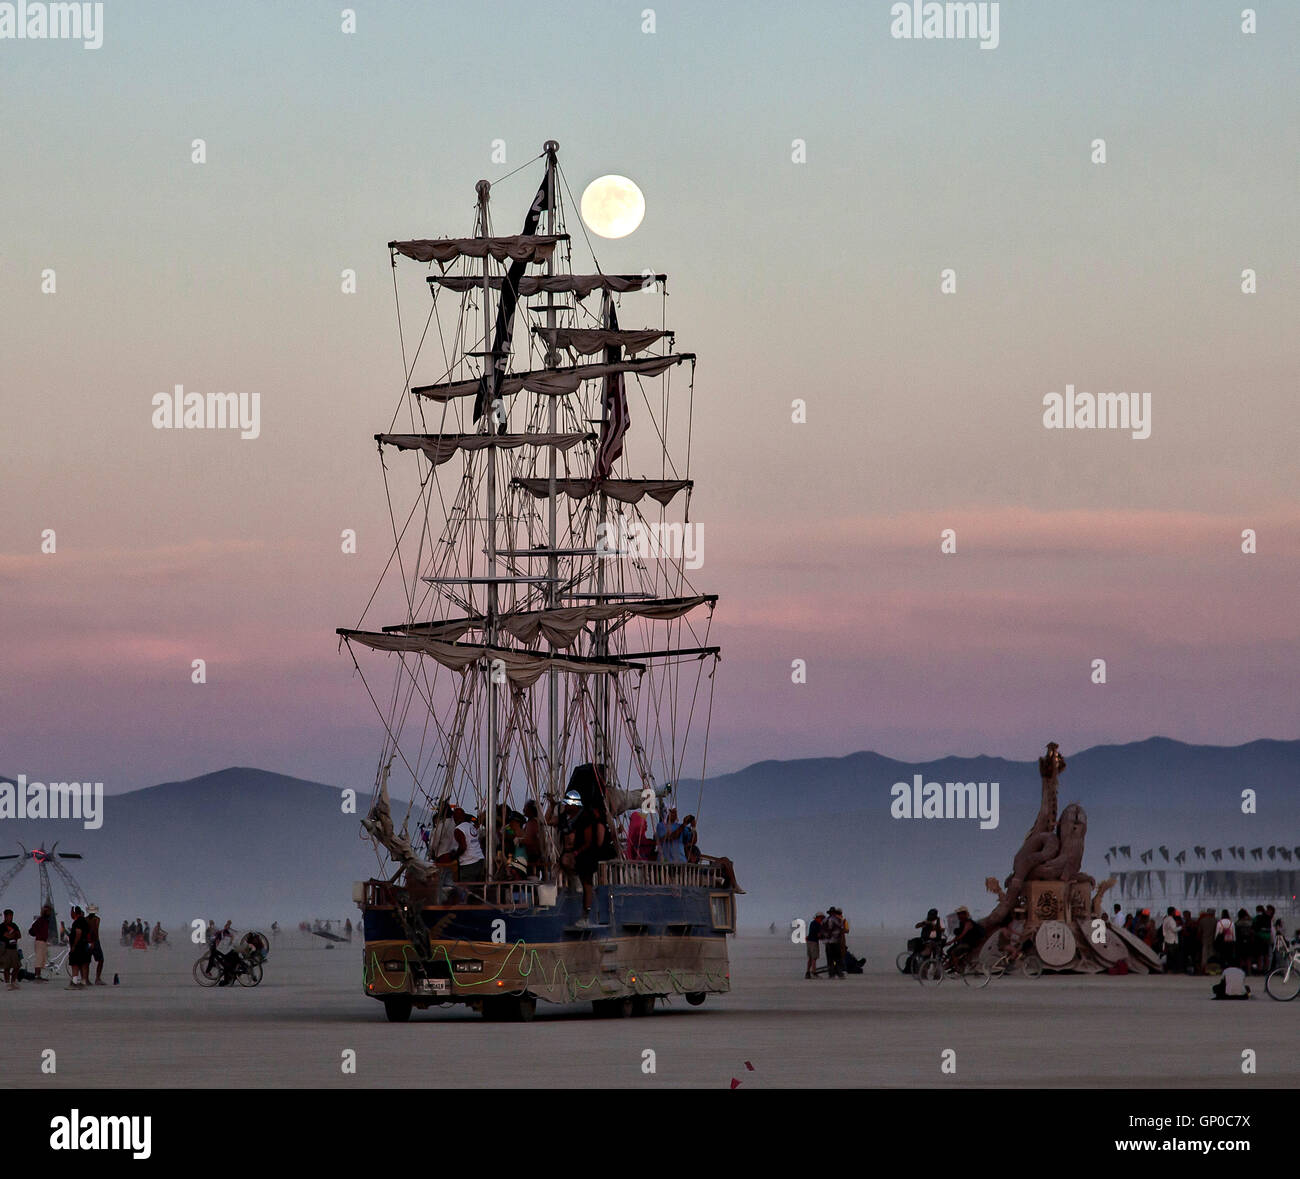 A tall sailing ship art vehicle during a sunset at the annual desert festival Burning Man August 30, 2016 in Black Rock City, Nevada. The annual festival attracts 70,000 attendees in one of the most remote and inhospitable deserts in America. Stock Photo